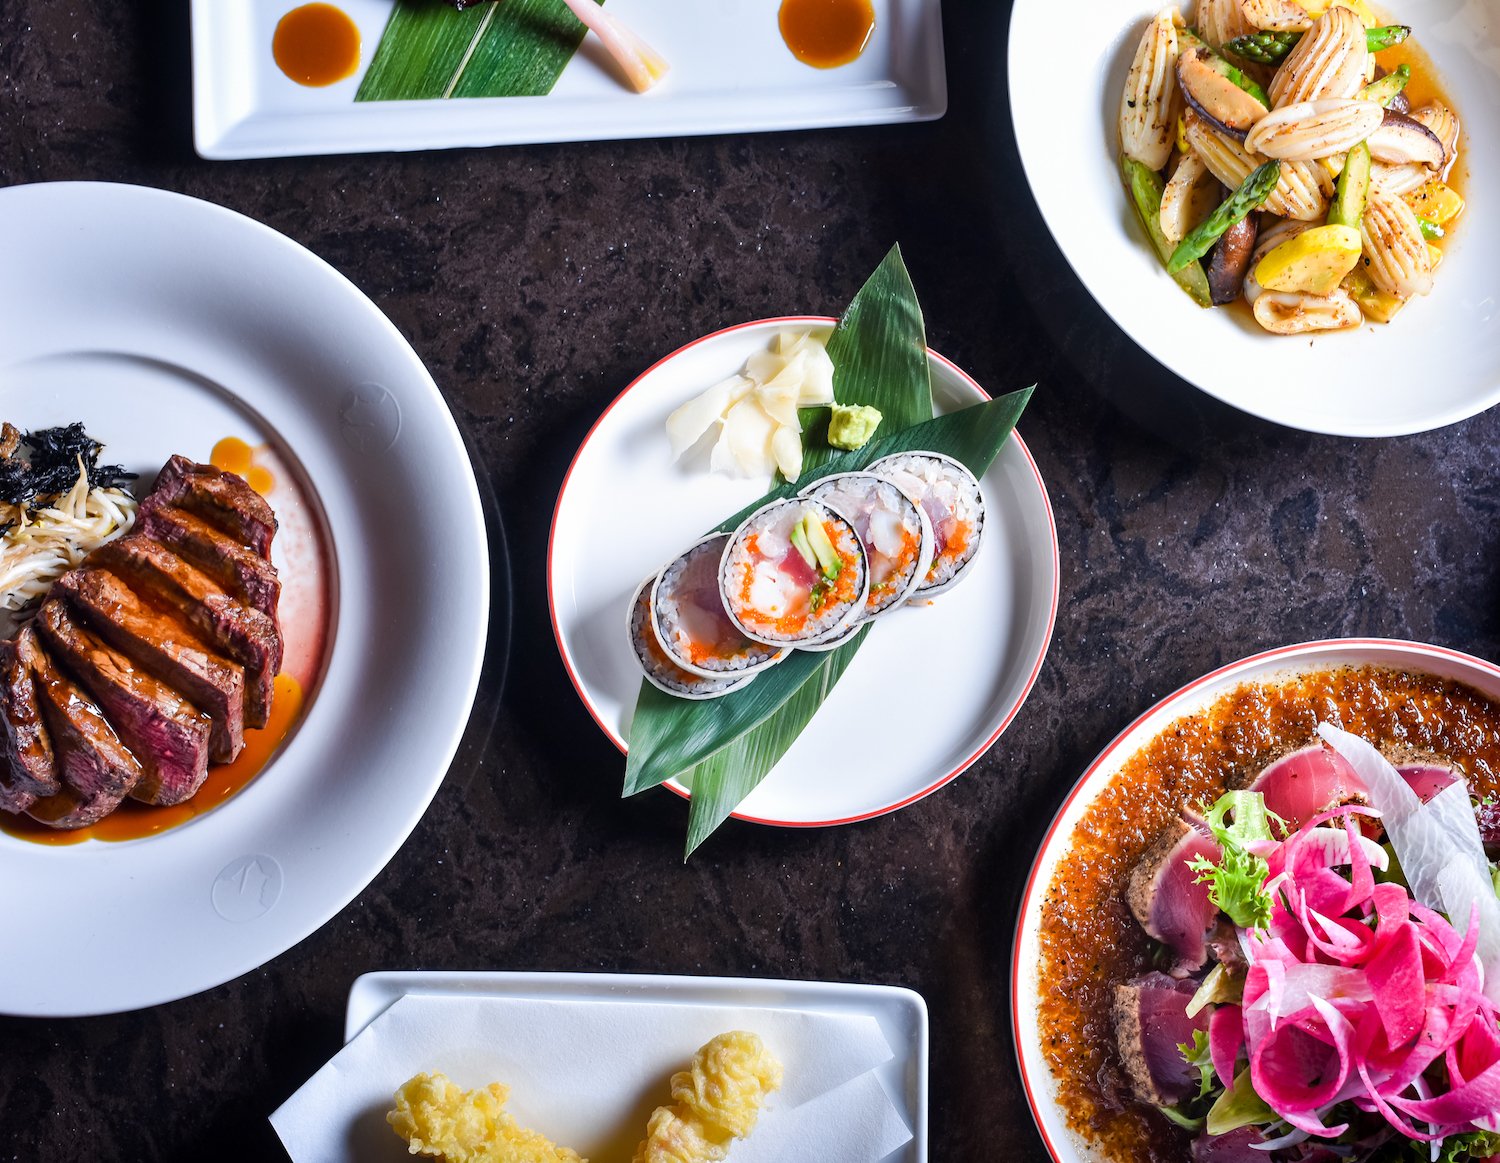 A table full of Nubu sushi, sashimi, and other Japanese food at the Hotel Del Coronado's new location